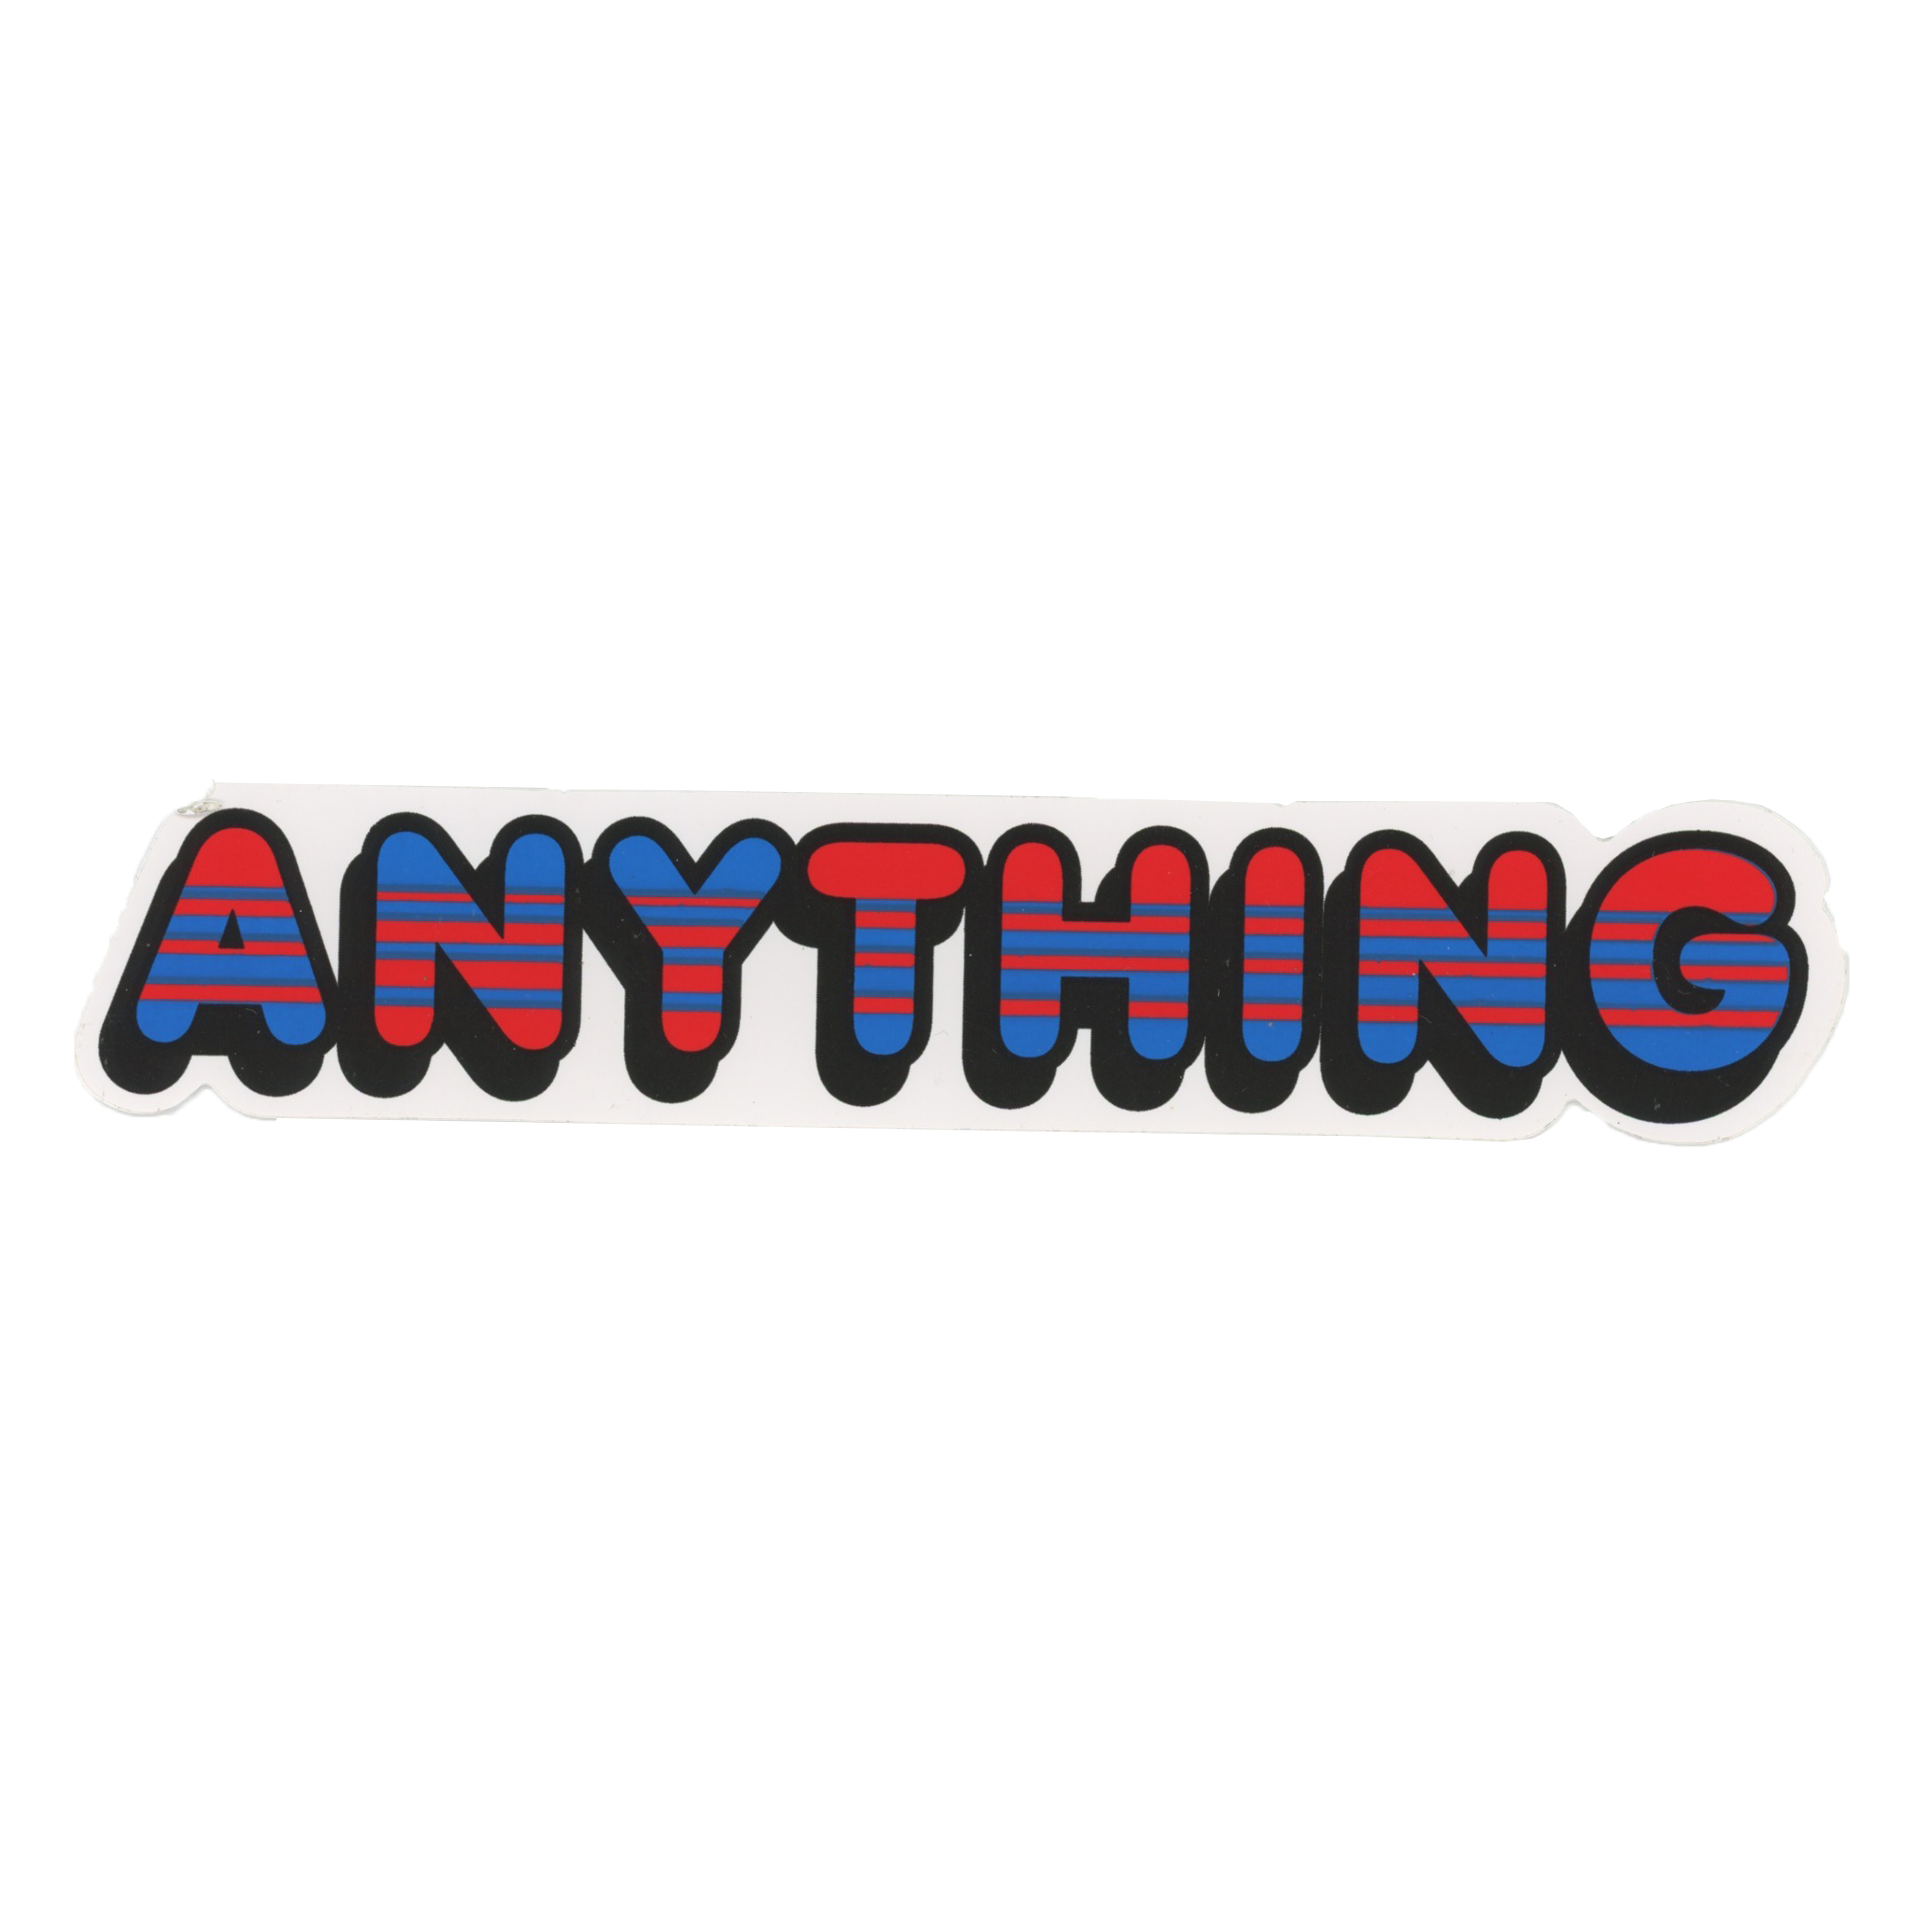 A NY Thing Striped Red/Blue Logo Sticker